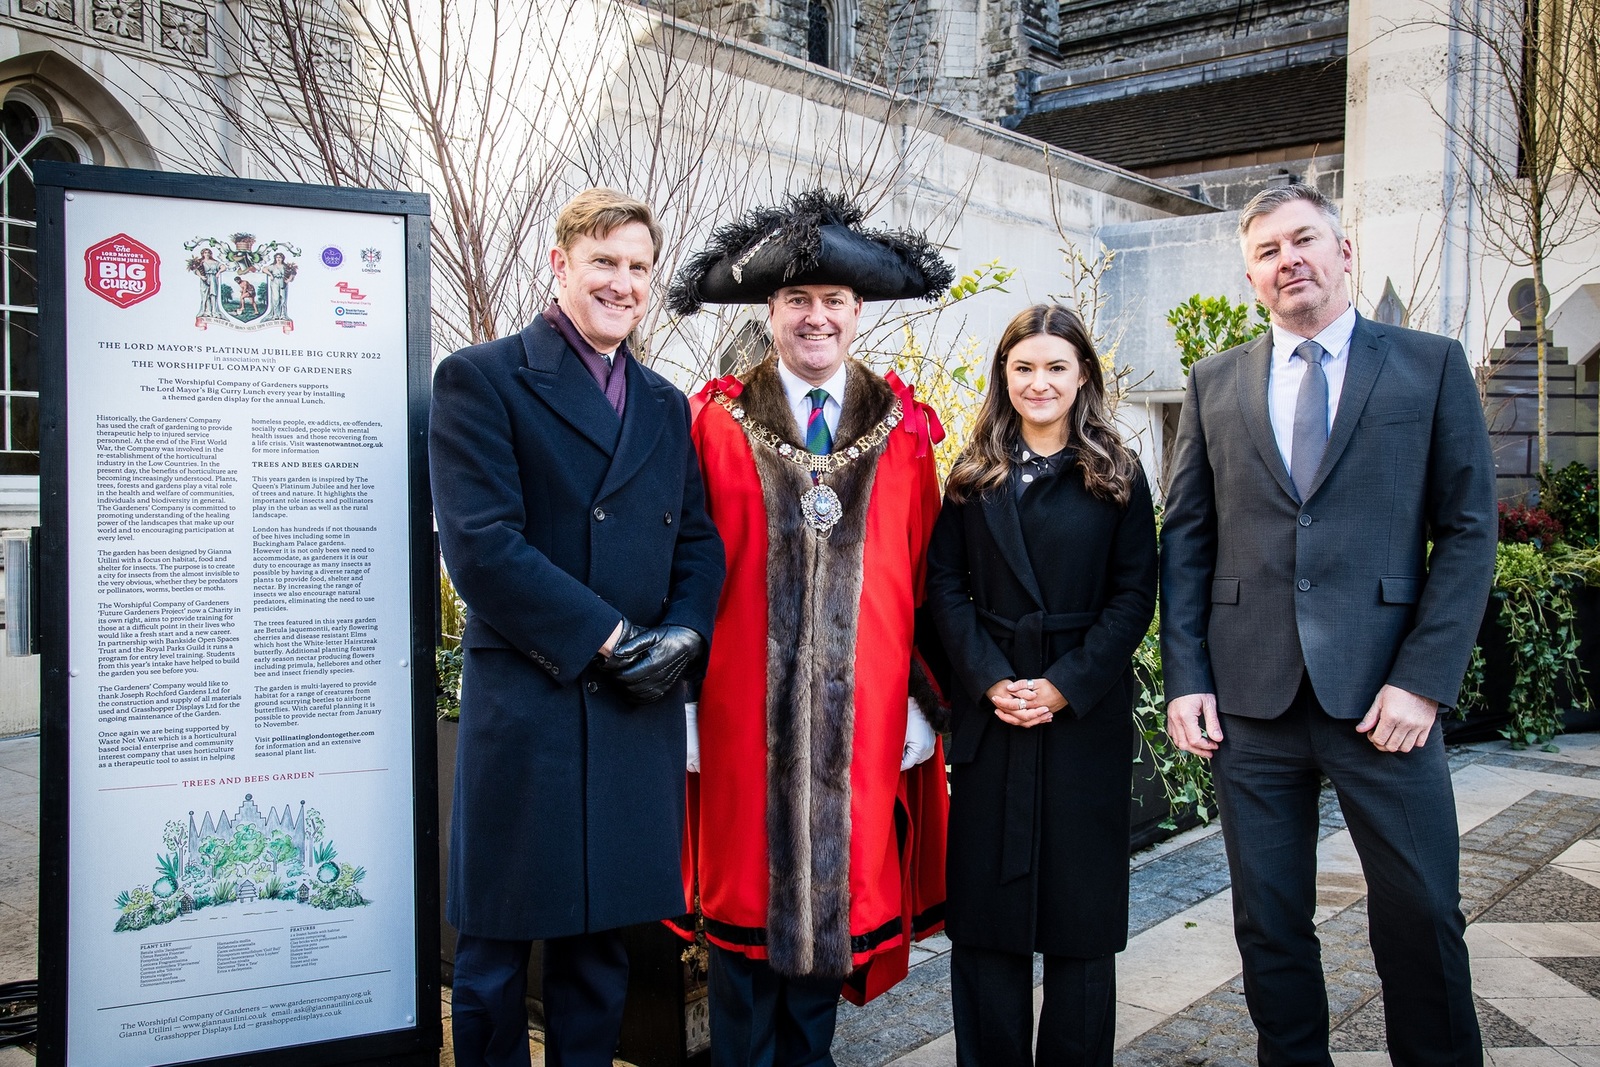 Launching the Commemorative Garden for the Lord Mayor’s Platinum Jubilee Big Curry Lunch